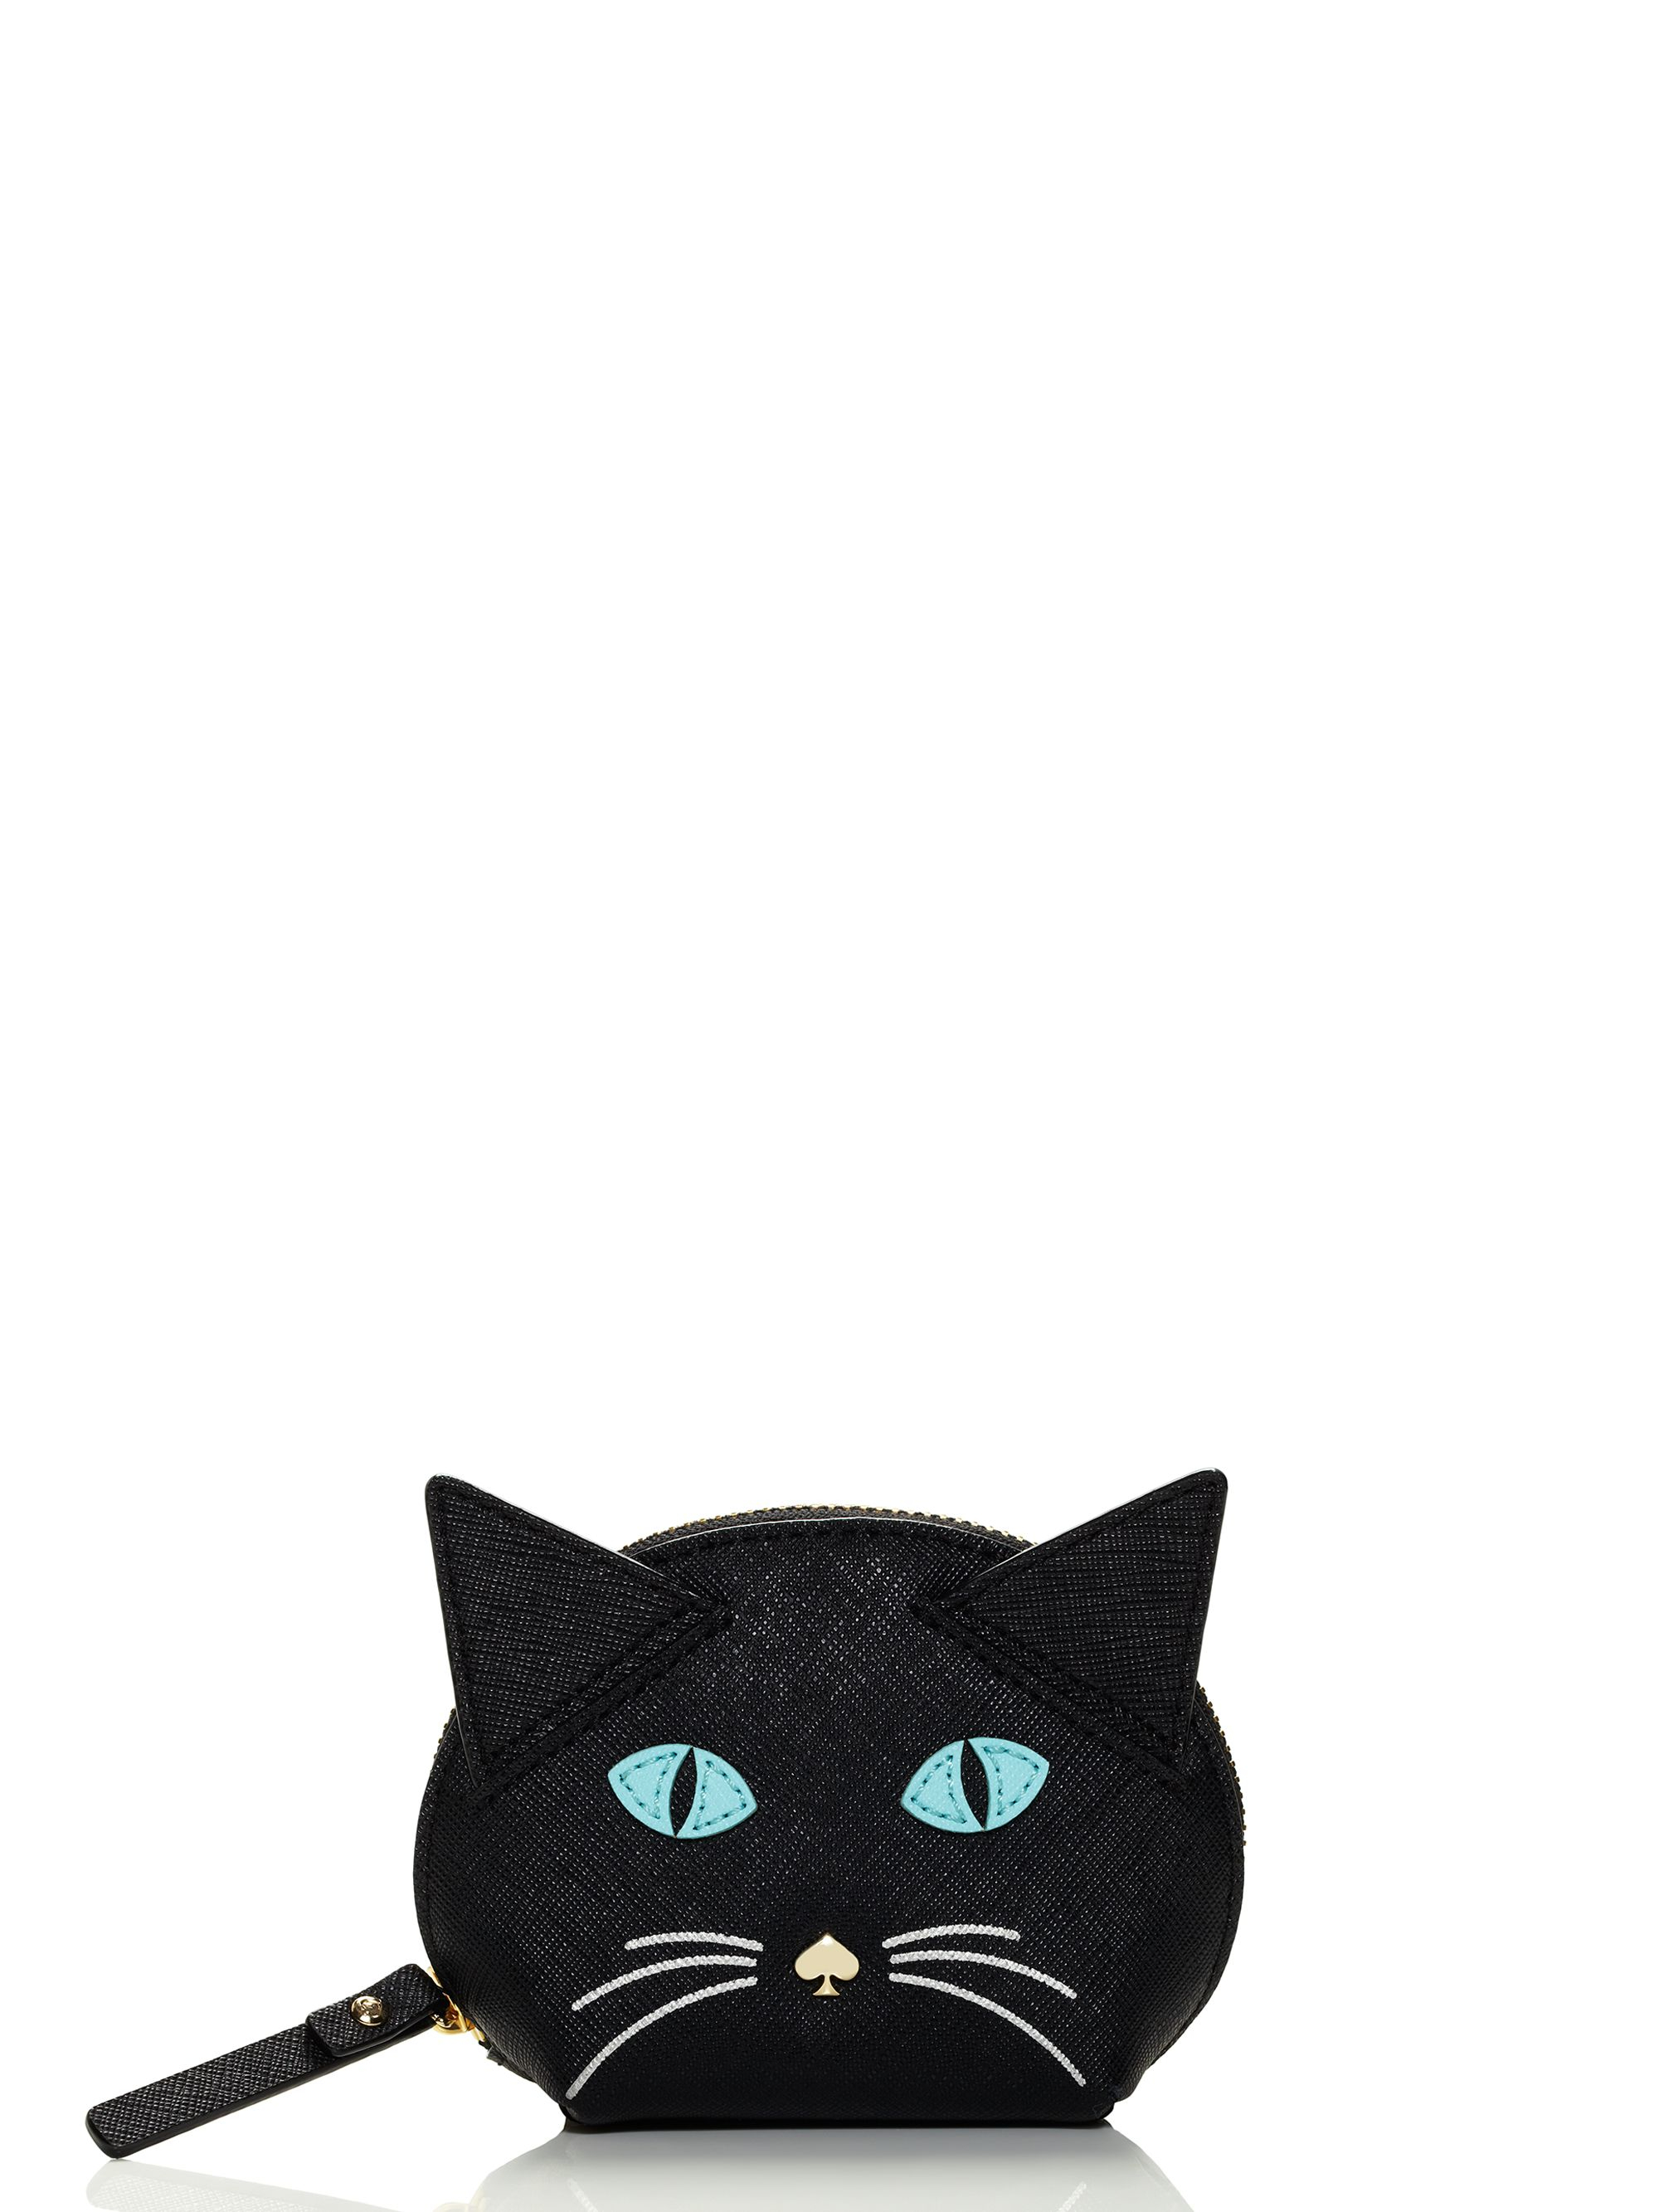 Kate Spade Cat'S Meow Cat Coin Purse in Black Lyst